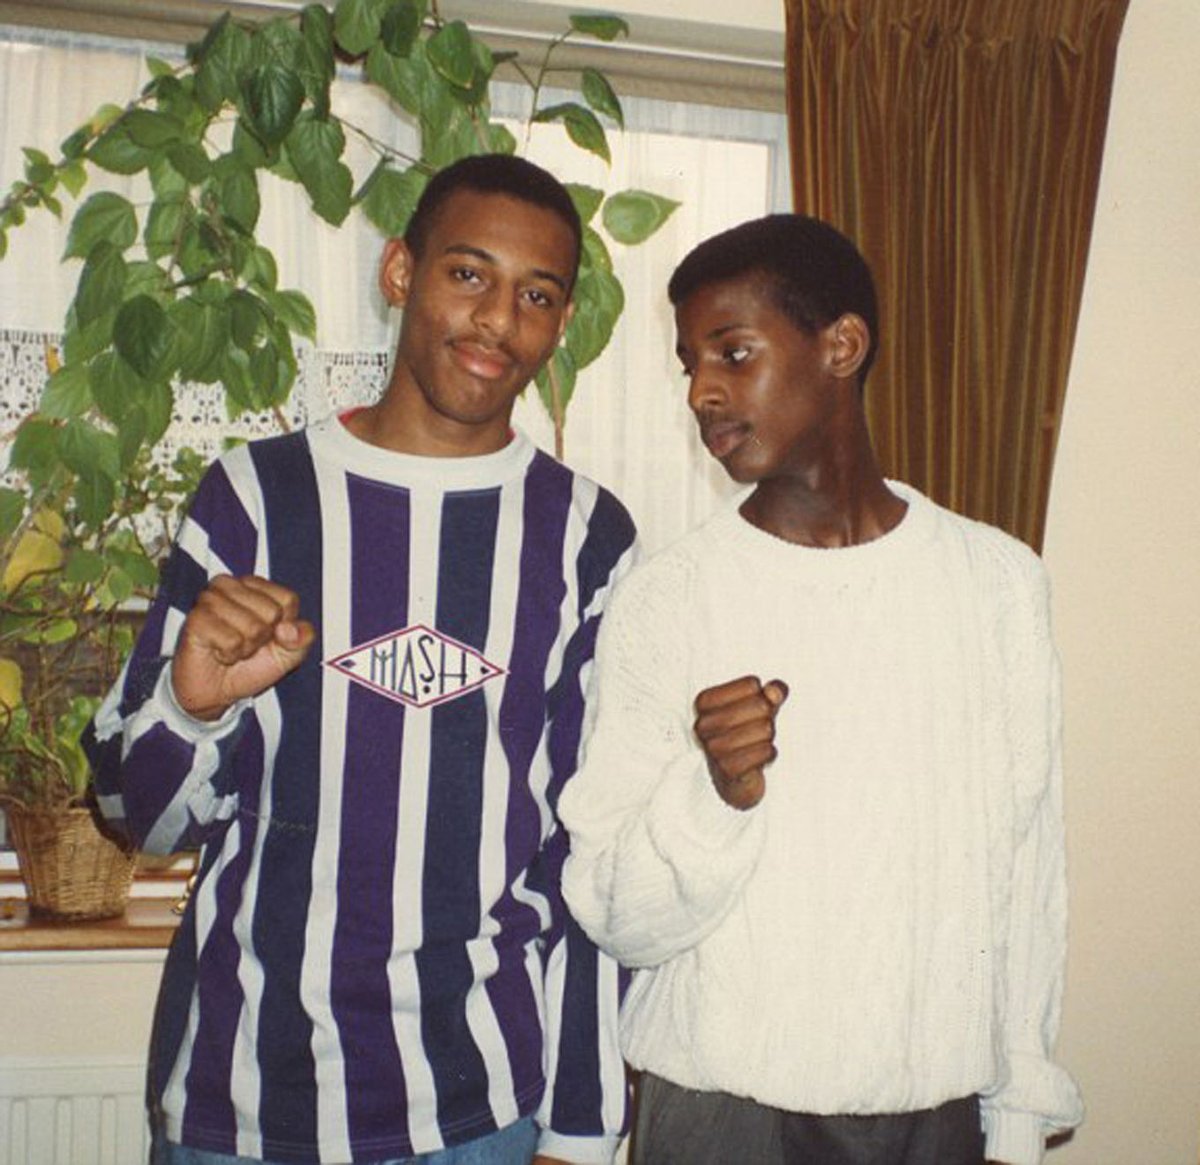 Remembering the life and enduring legacy of Stephen Lawrence, who was murdered by racist strangers as he made his way home on 22nd April 1993. Last year, we partnered with @sldayfdn to produce #DearStephen in his memory🧡 ow.ly/1Vsm50NOaFB